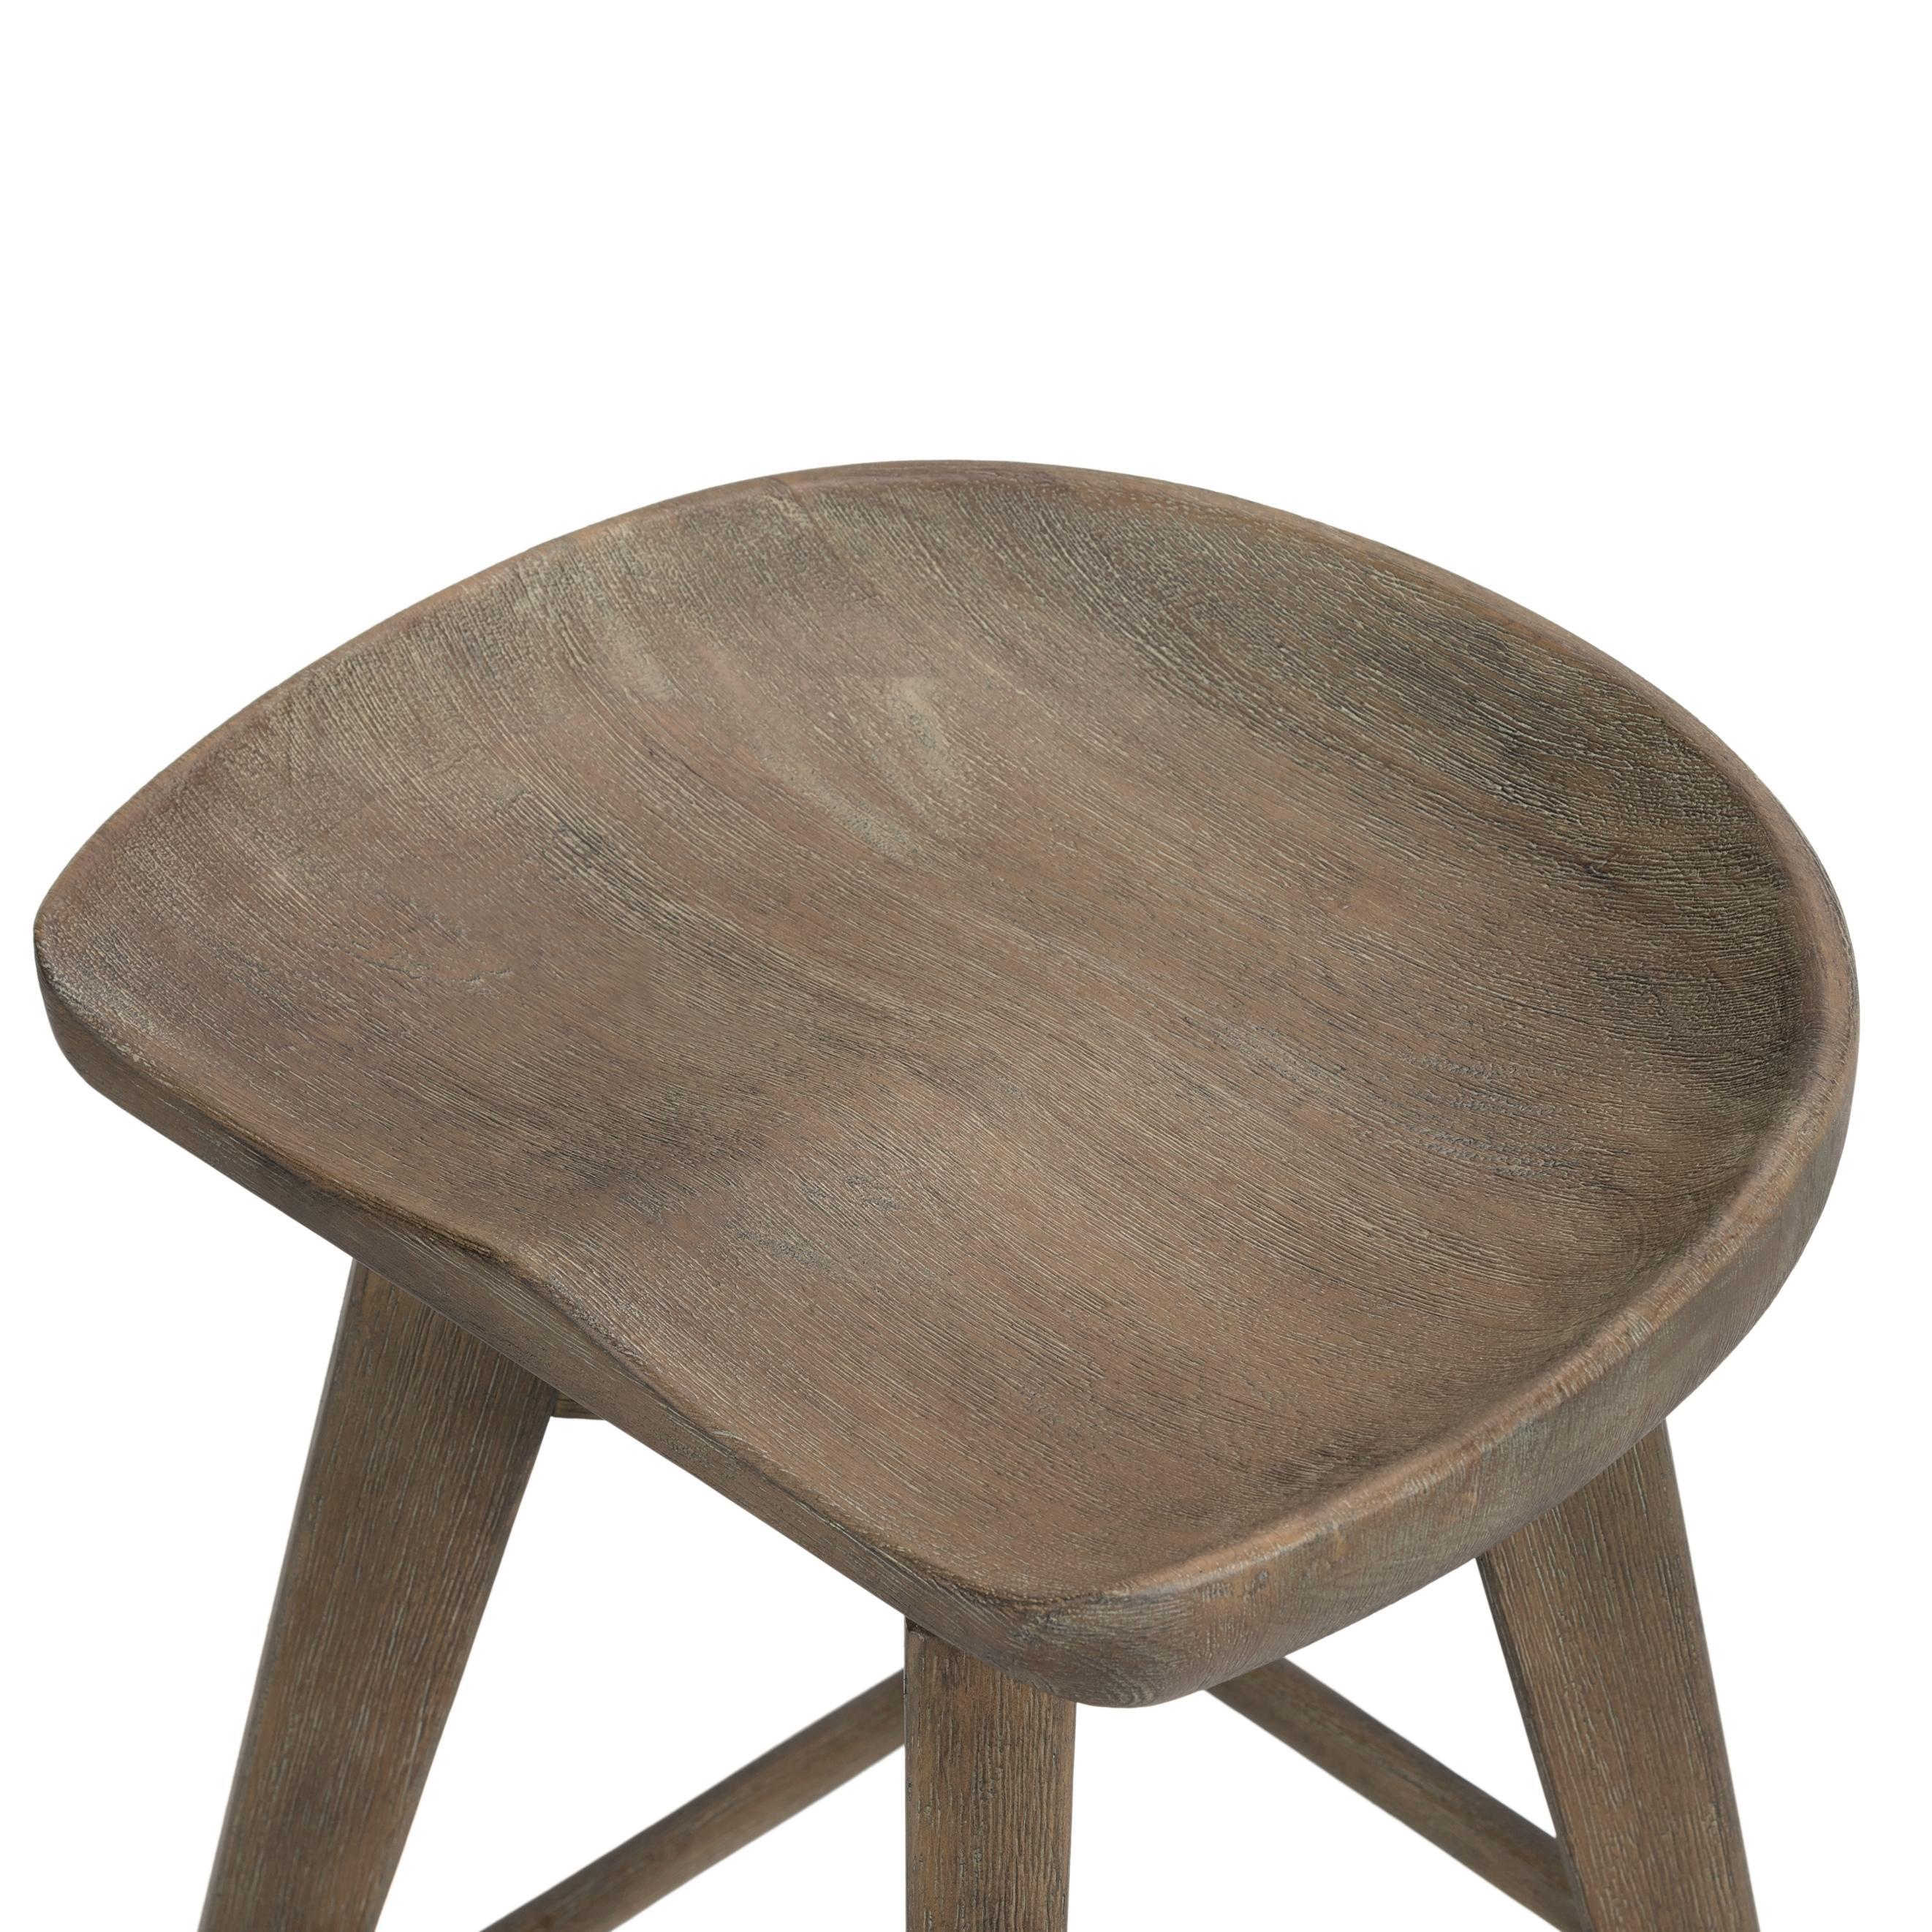 A fresh spin on bar seating, the parawood Paramore Swivel Counter Stool is finished in a deep charcoal for a clean, sleek look. The stool is topped with a swivel. Amethyst Home provides interior design, new home construction design consulting, vintage area rugs, and lighting in the Los Angeles metro area.